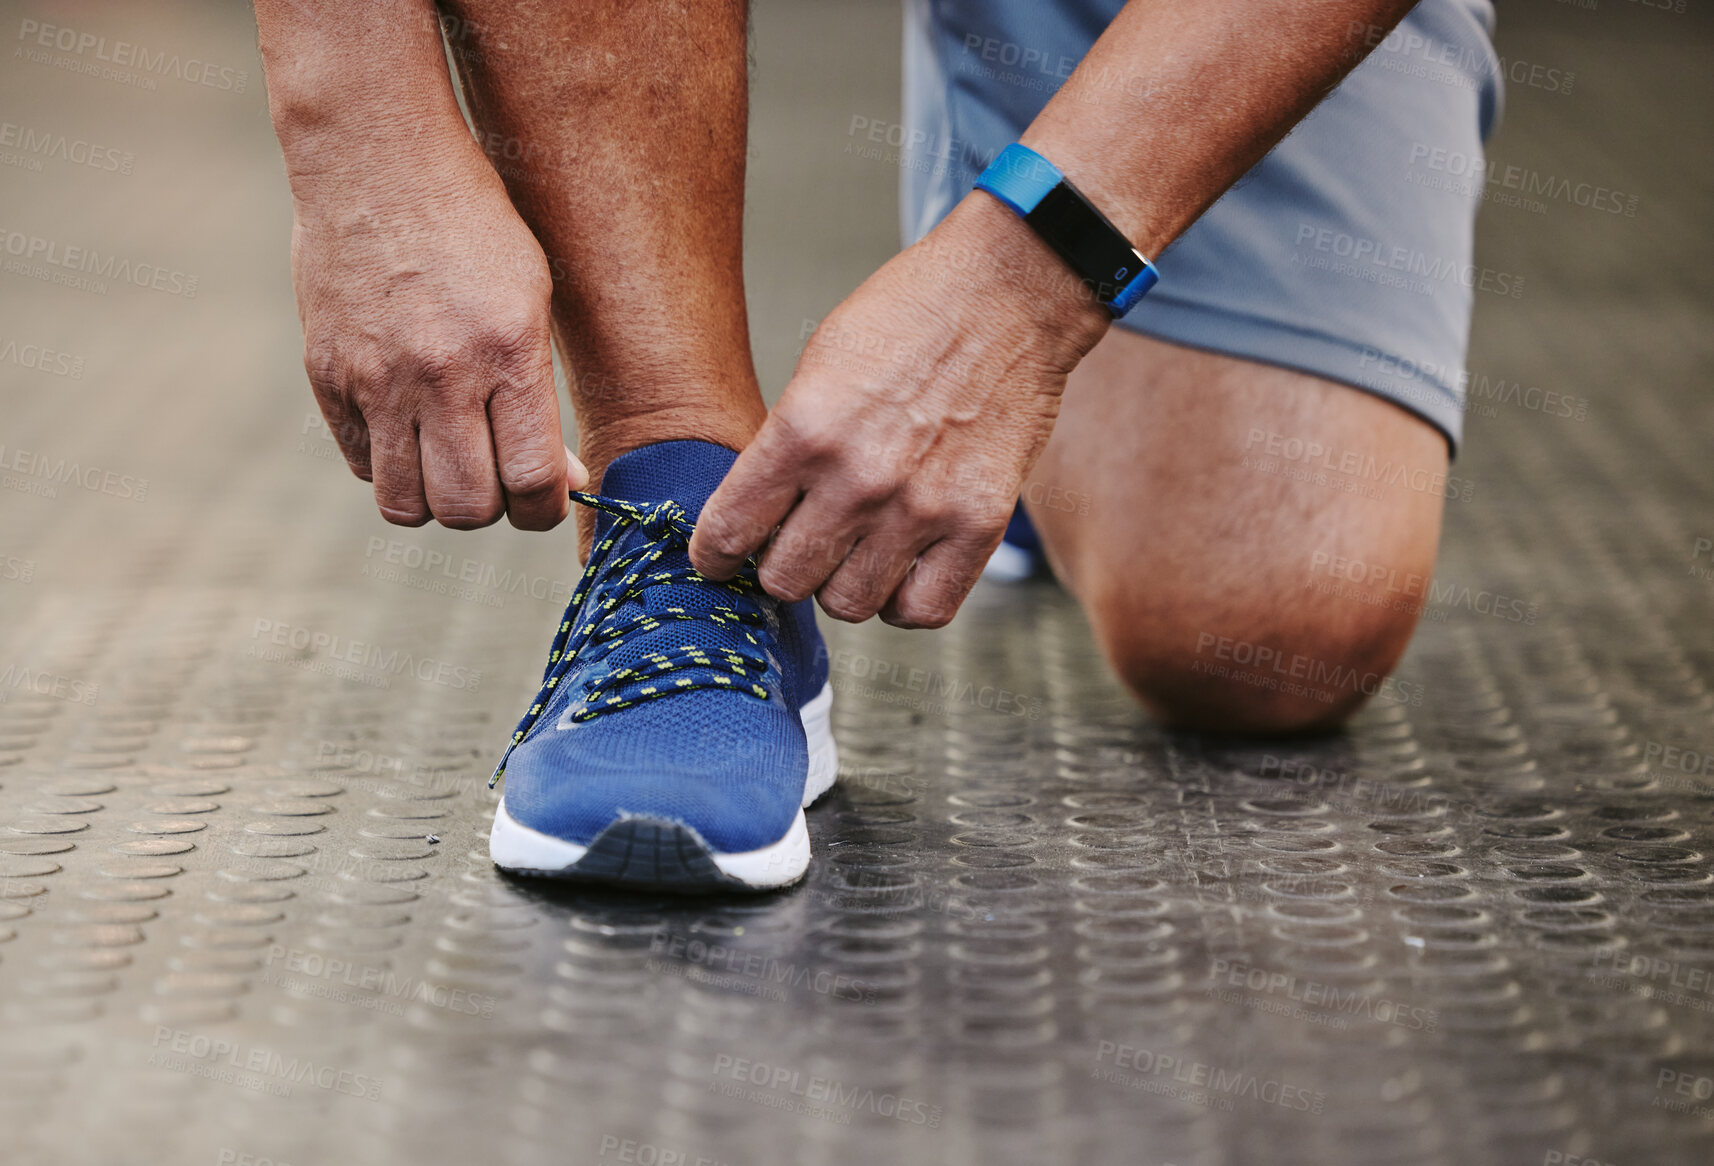 Buy stock photo Hands, tie shoes and fitness in gym to start workout, training or exercise for wellness. Sports, athlete and man tying sneakers or footwear laces to get ready for exercising or running for health.